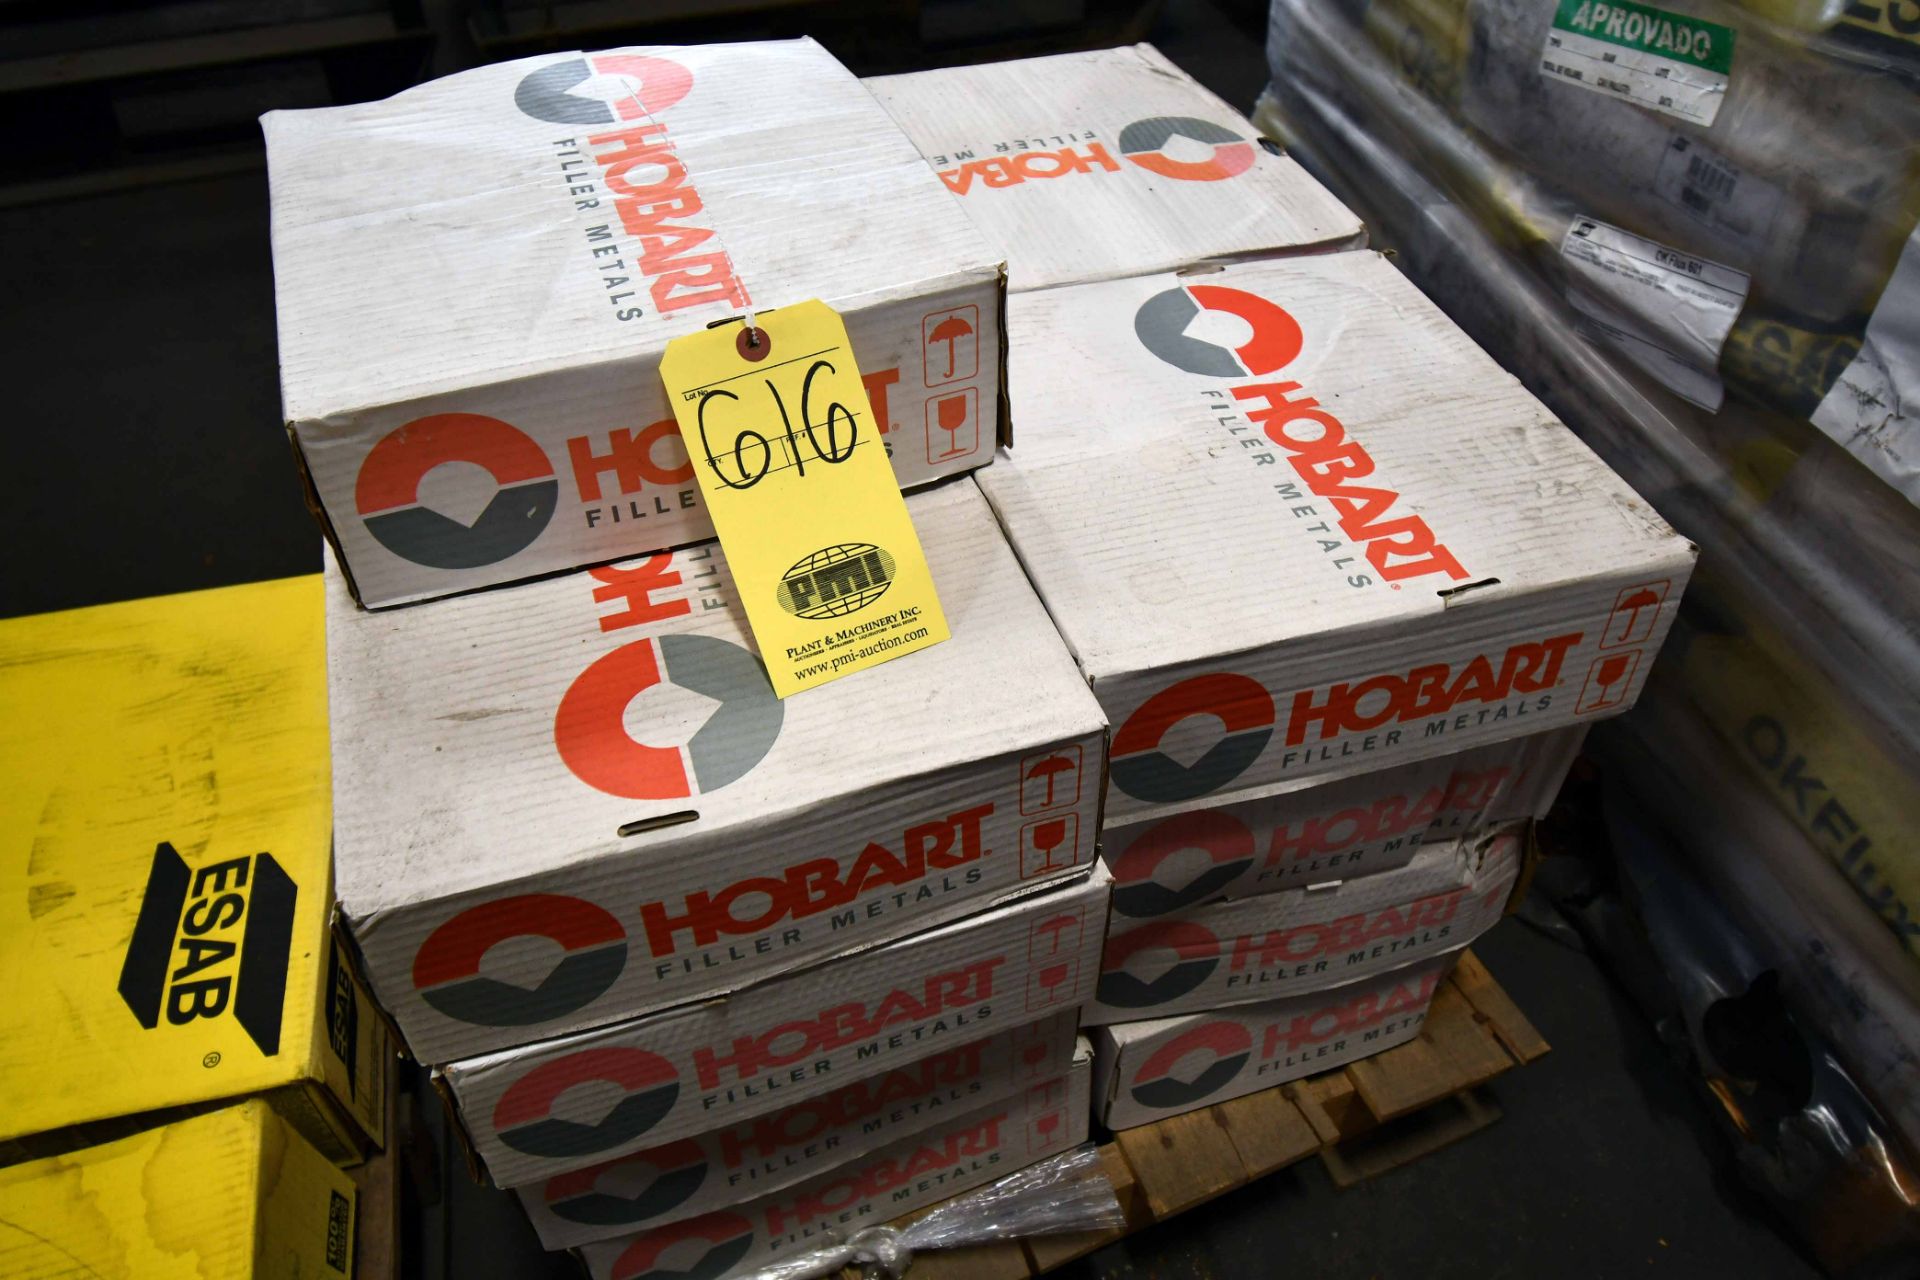 LOT OF WELDING WIRE, HOBART MEGAFIL 821R, .045", 35 lbs. (pallet of seventeen boxes)